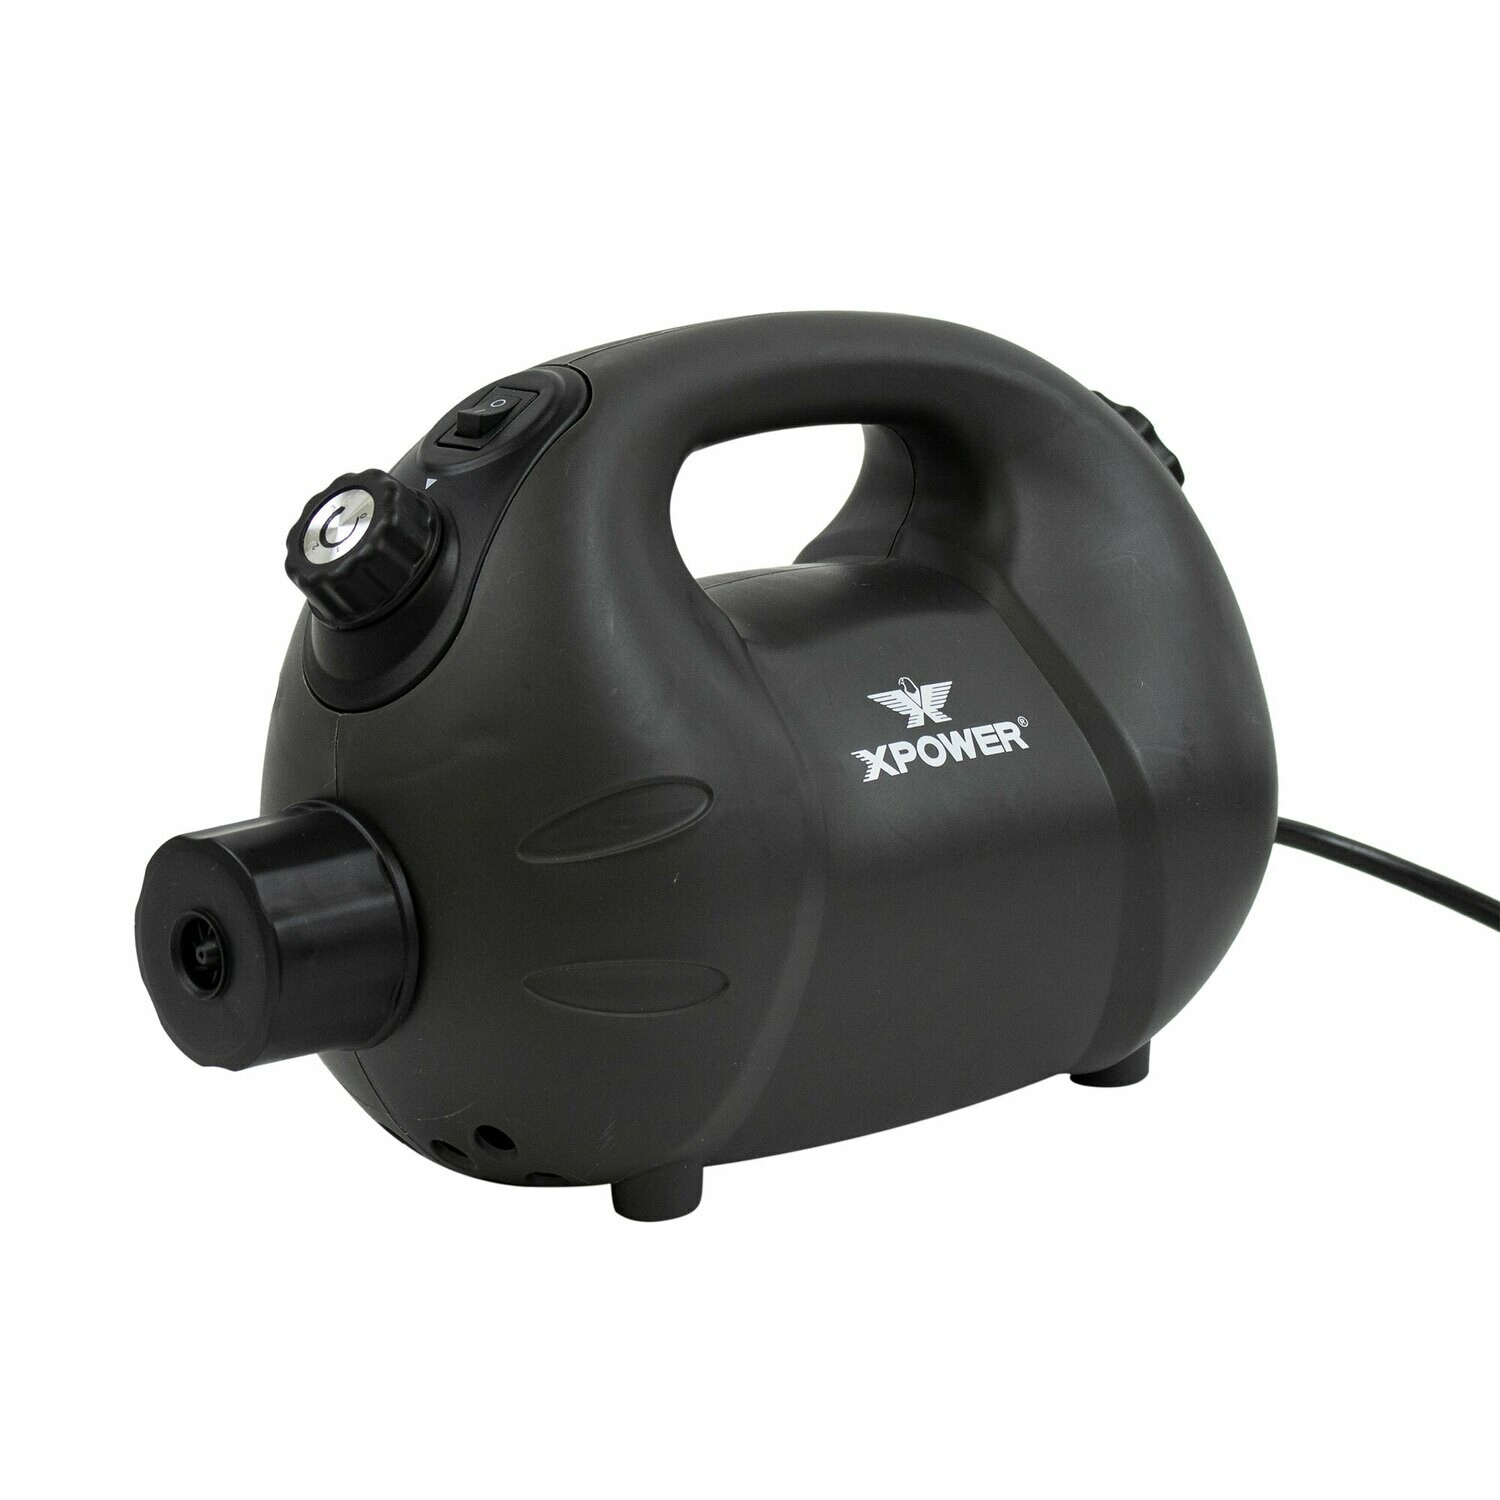 Xpower F-8 ULV Cold Fogger (Call To Order)